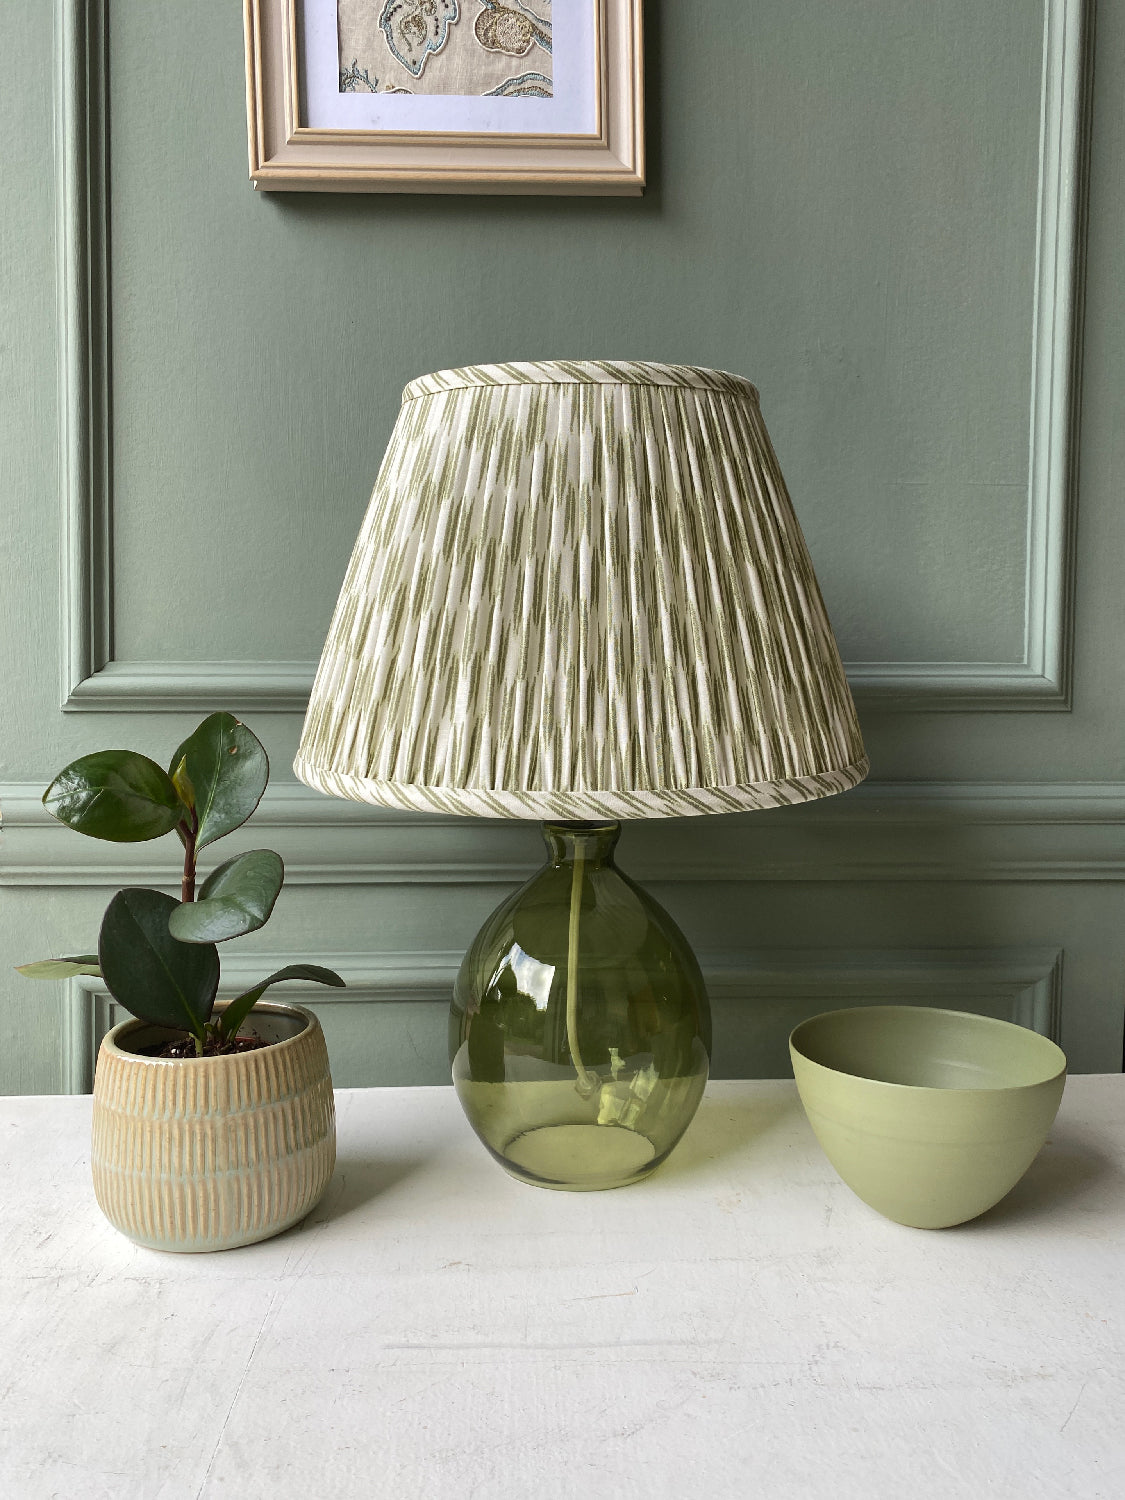 Small green and white lampshade on green lamp